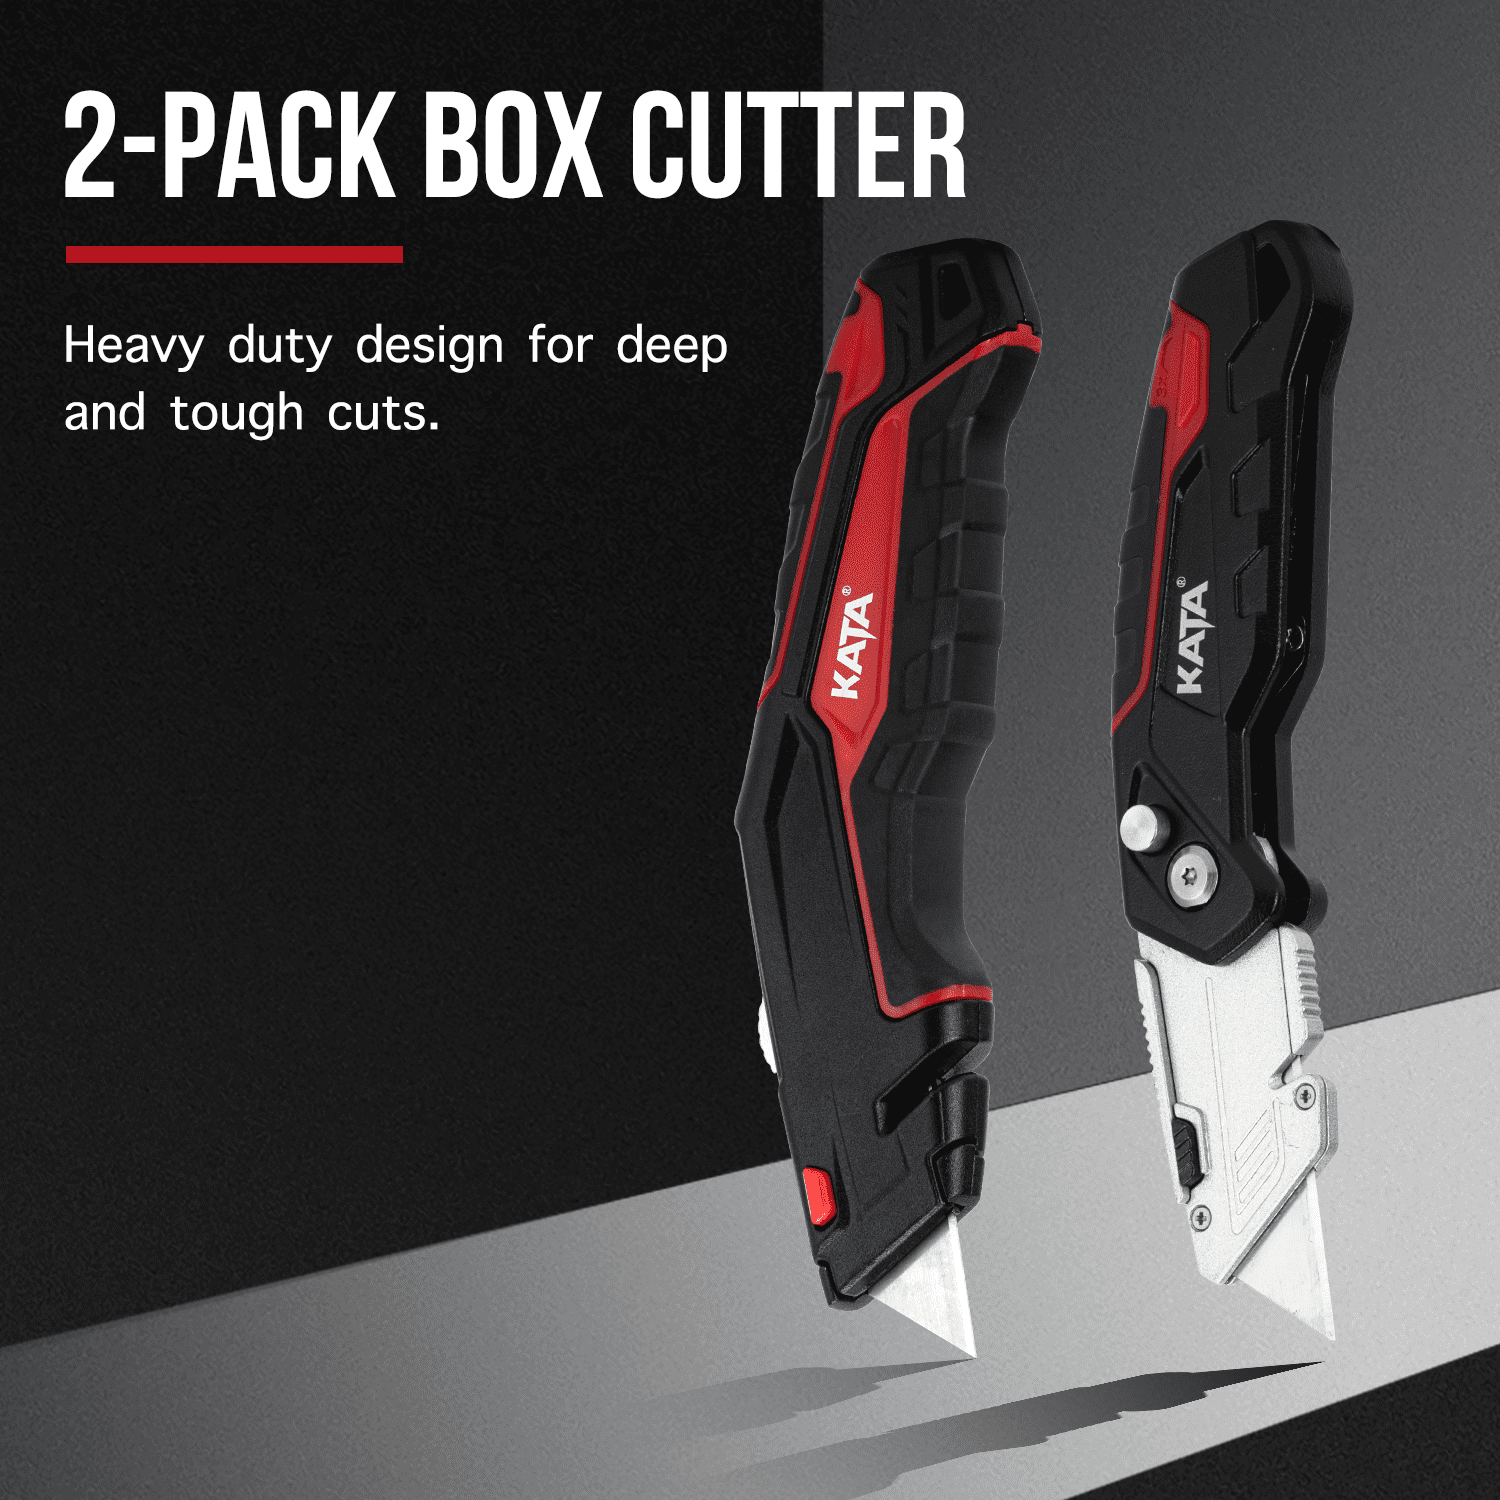 KATA 2-Pack Heavy Duty Utility Knife,Retractable and Folding Box Cutter  Knife for Cartons, Cardboard and Boxes, Extra 10pcs SK5 Blades Included 